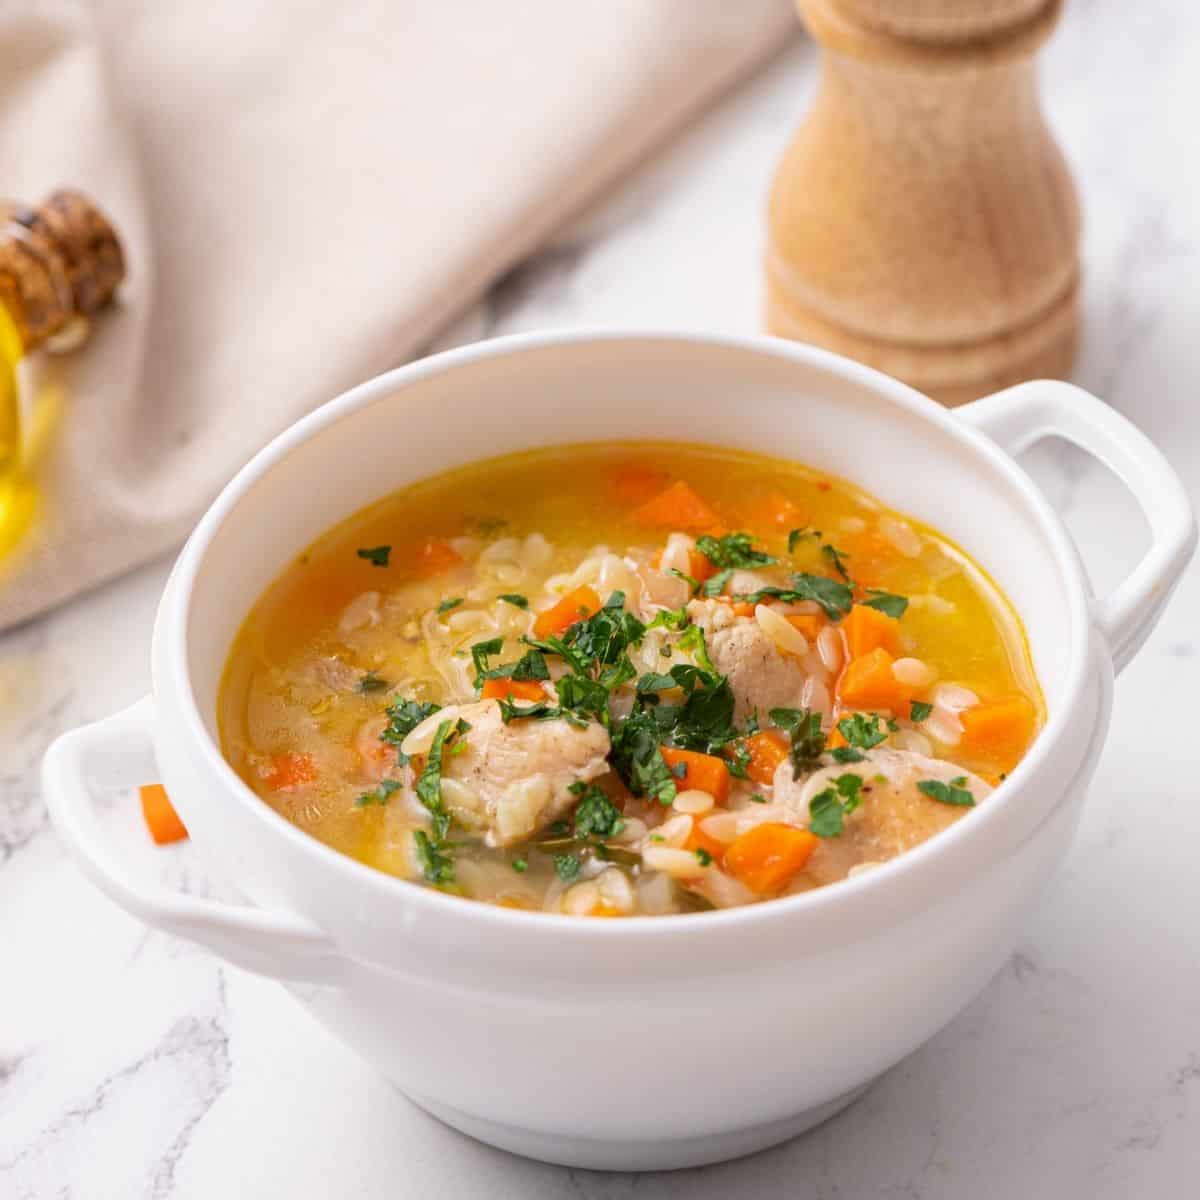 Bowl of chicken orzo soup topped with parsley.